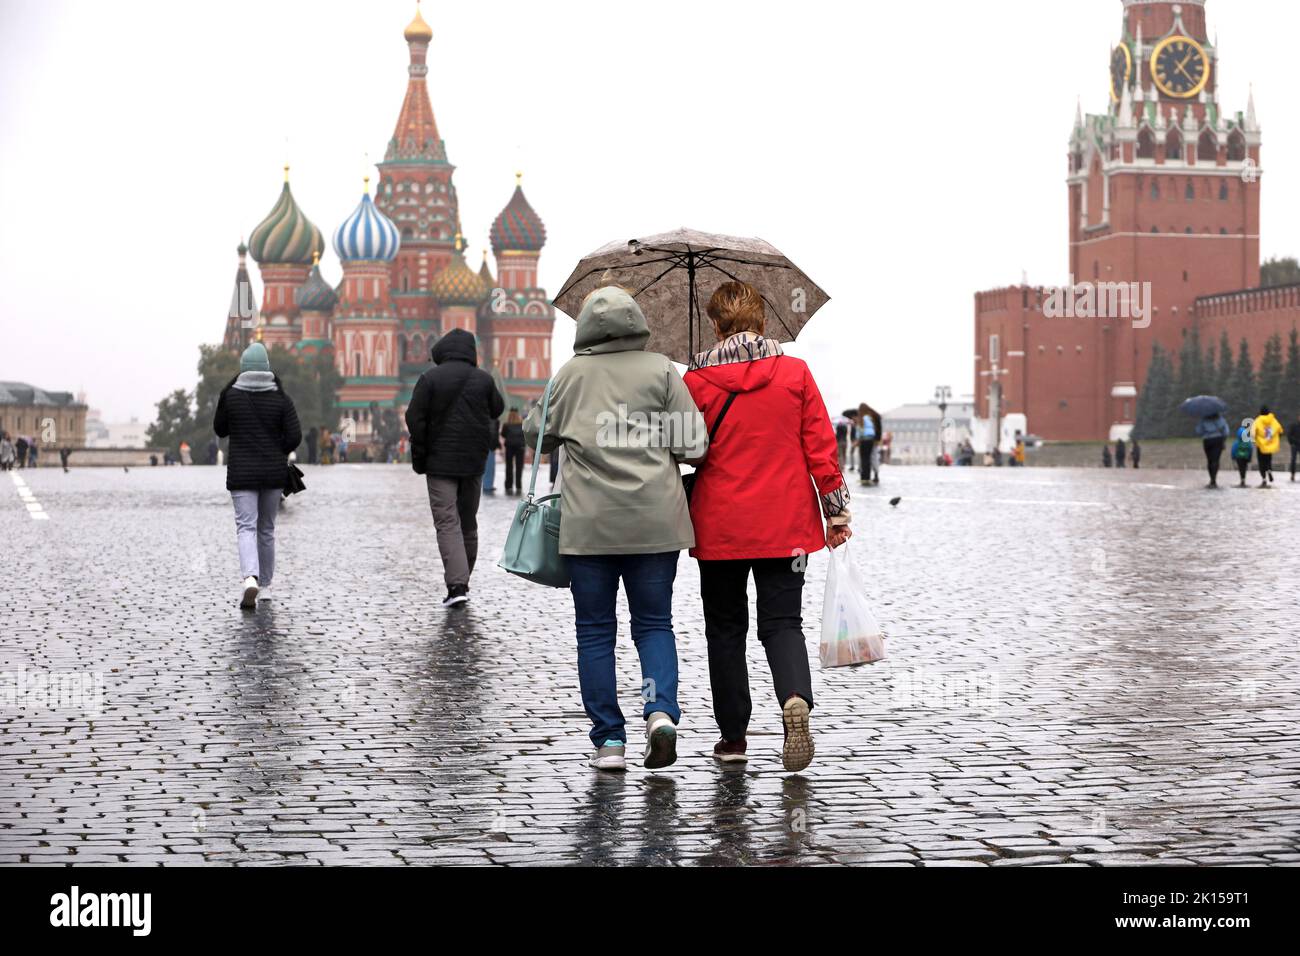 Rain in Moscow, two women with one umbrella walk on a Red square on background of St. Basil's Cathedral and Kremlin tower. Rainy weather in autumn Stock Photo